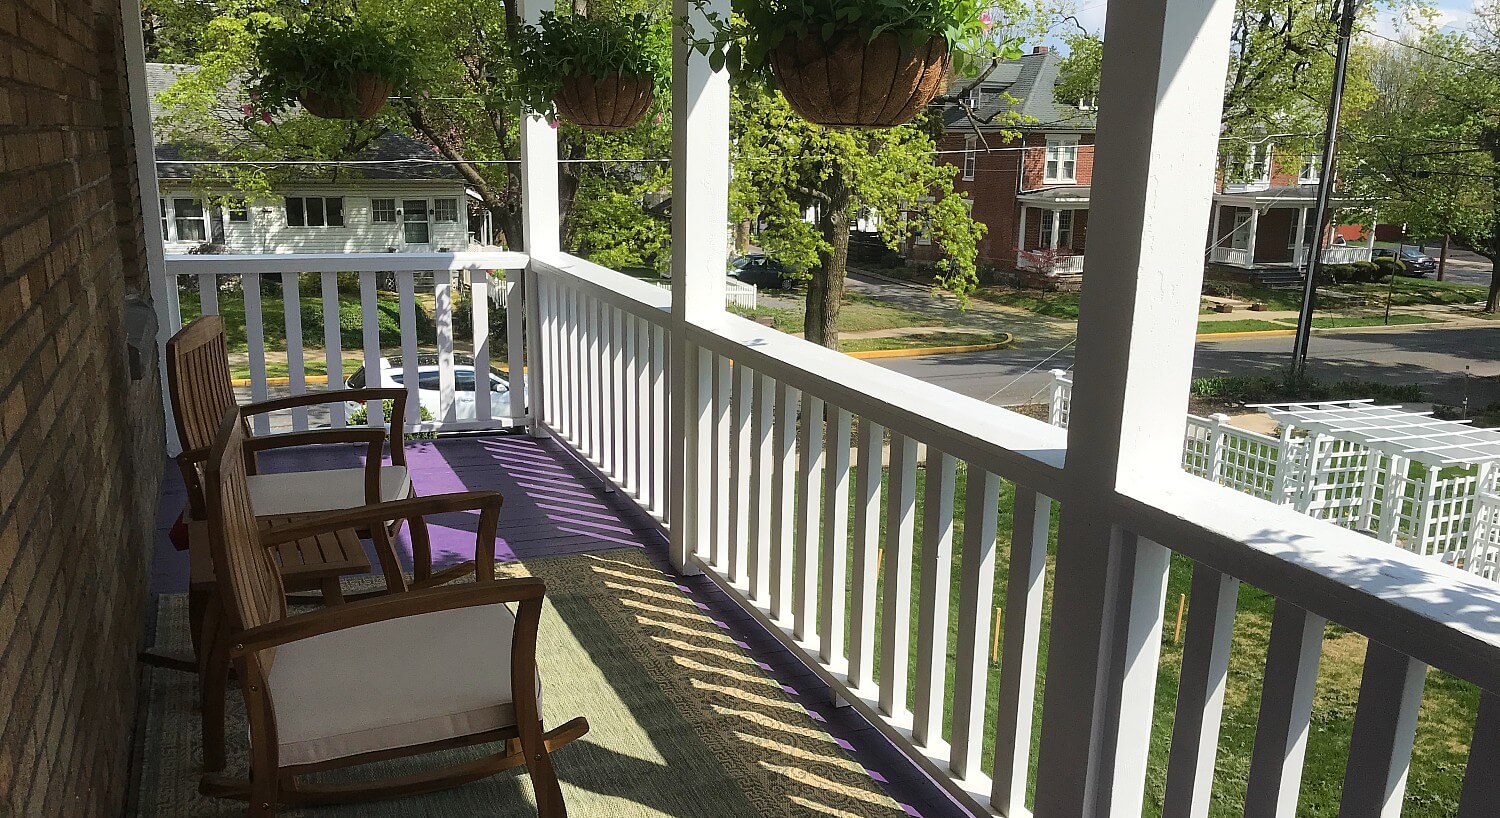 Upper balcony porch of a home with white railing, hanging flowers and two sitting chairs with side table